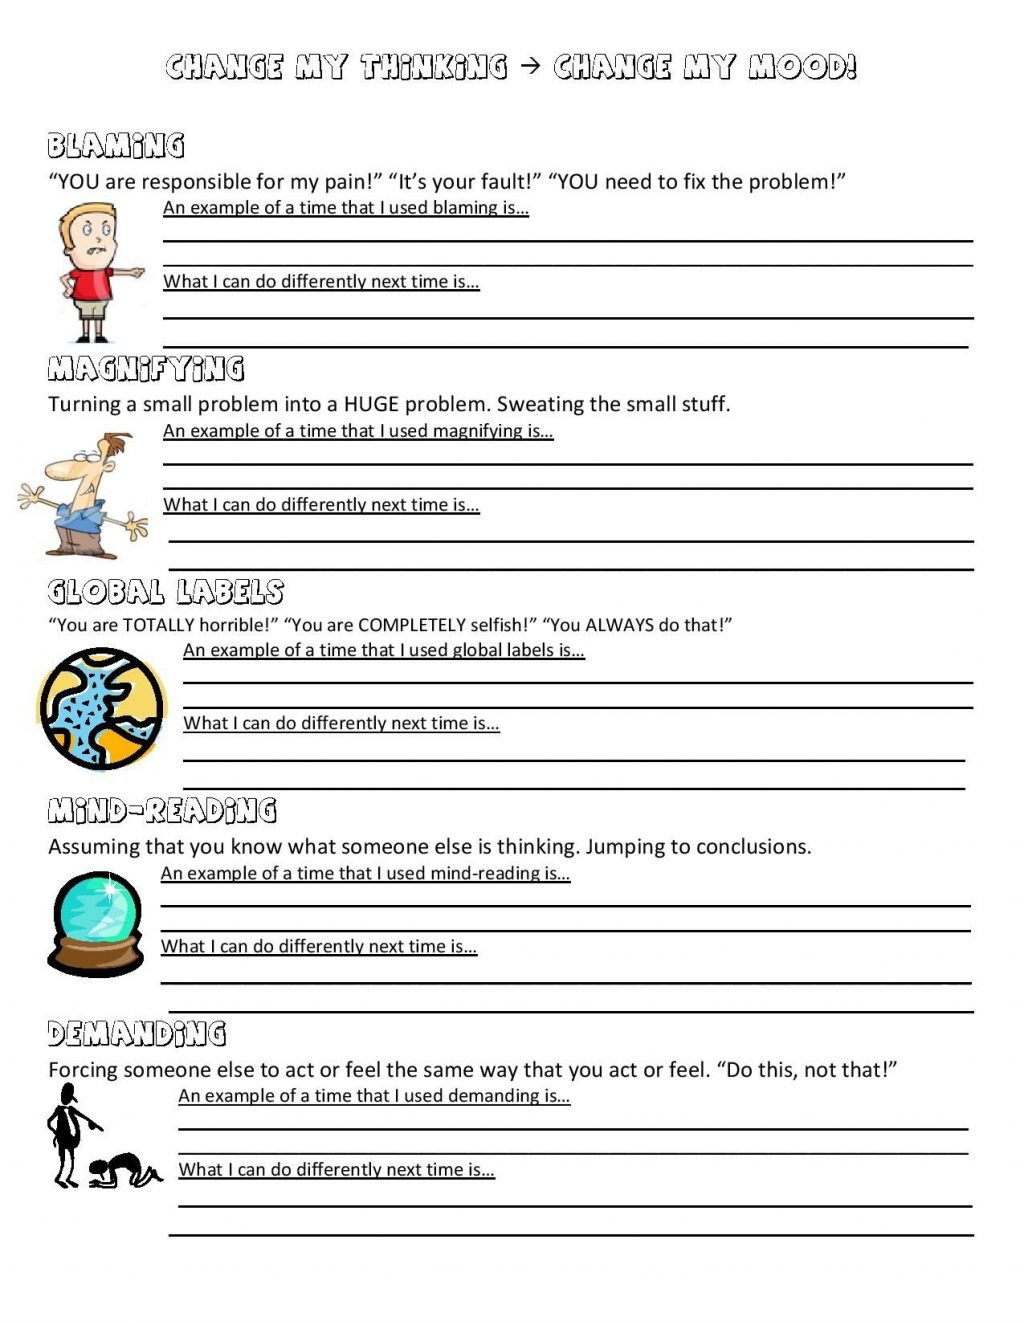 Worksheet Ideas Conflict Resolution For Teenagers —